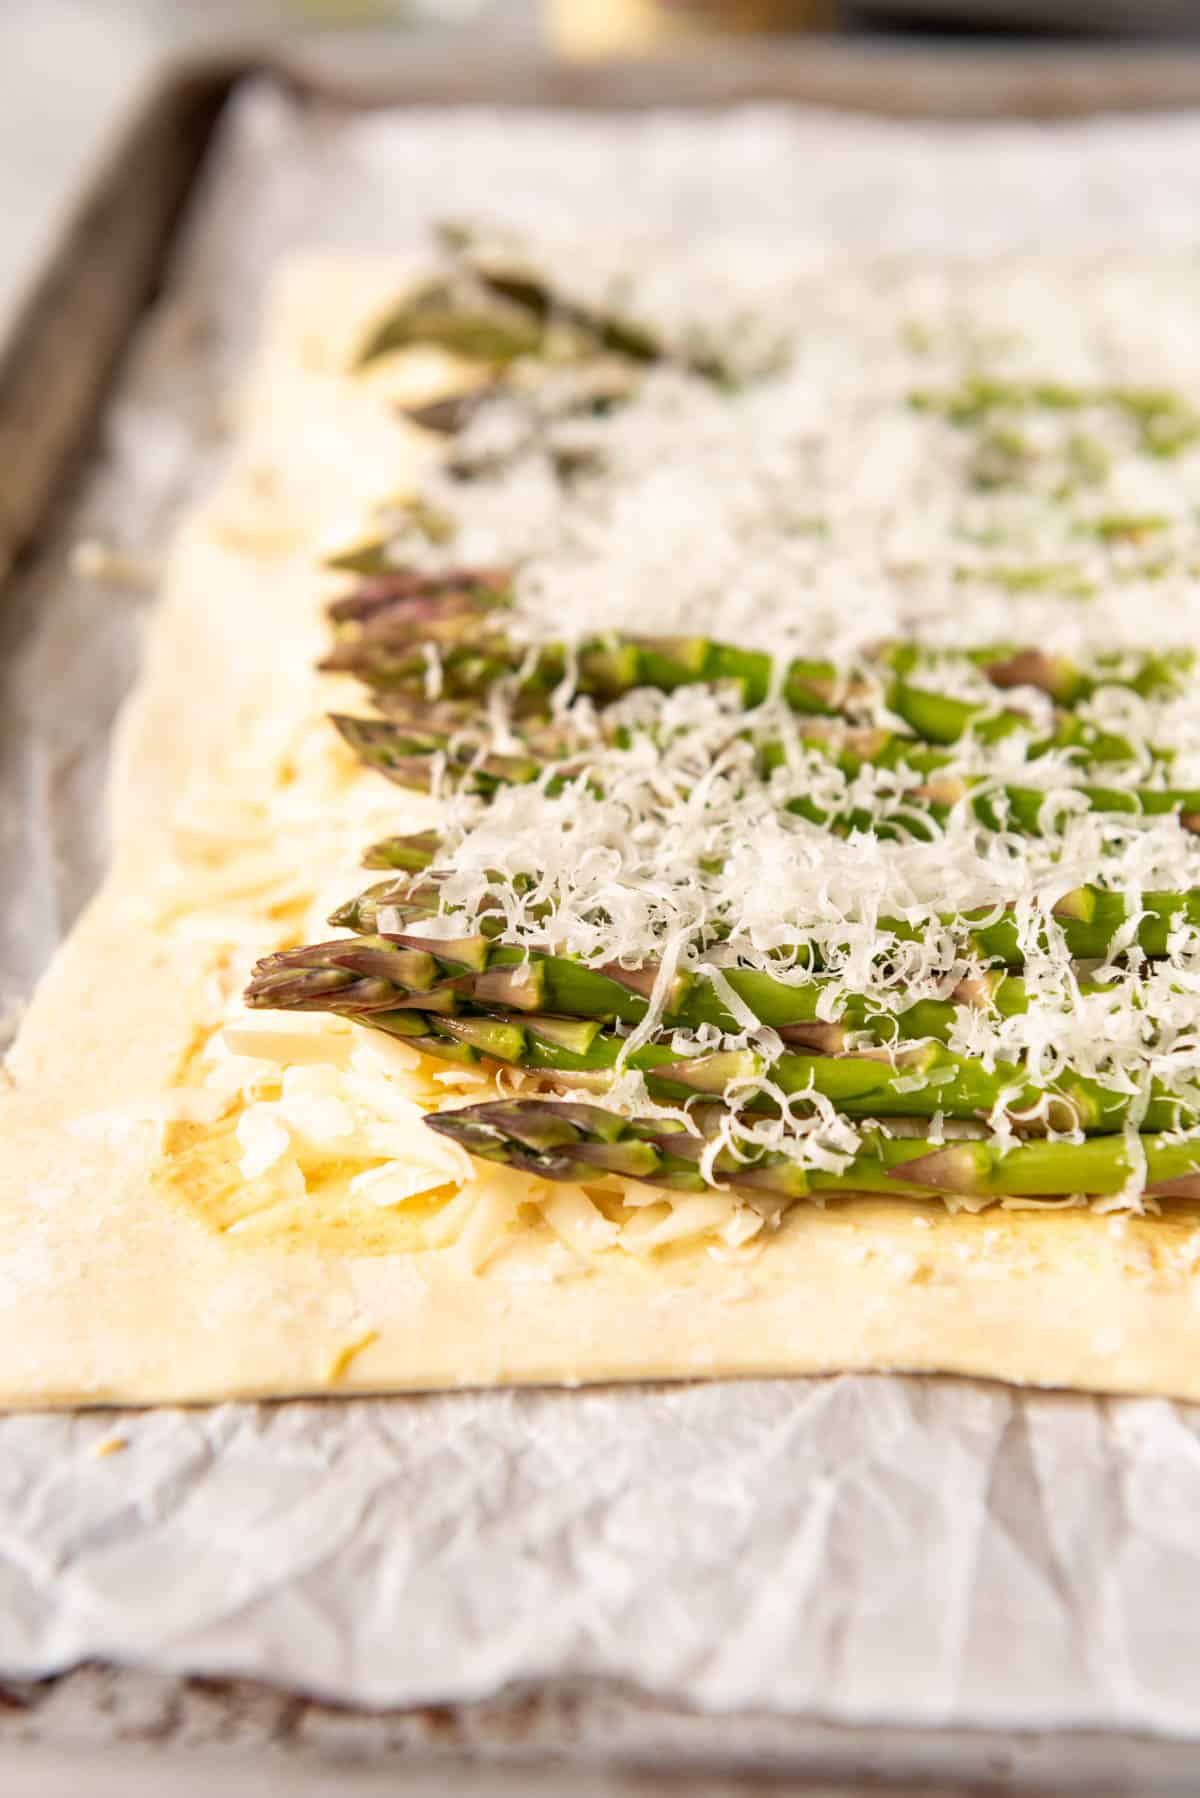 An image of asparagus sprinkled with Parmesan cheese.